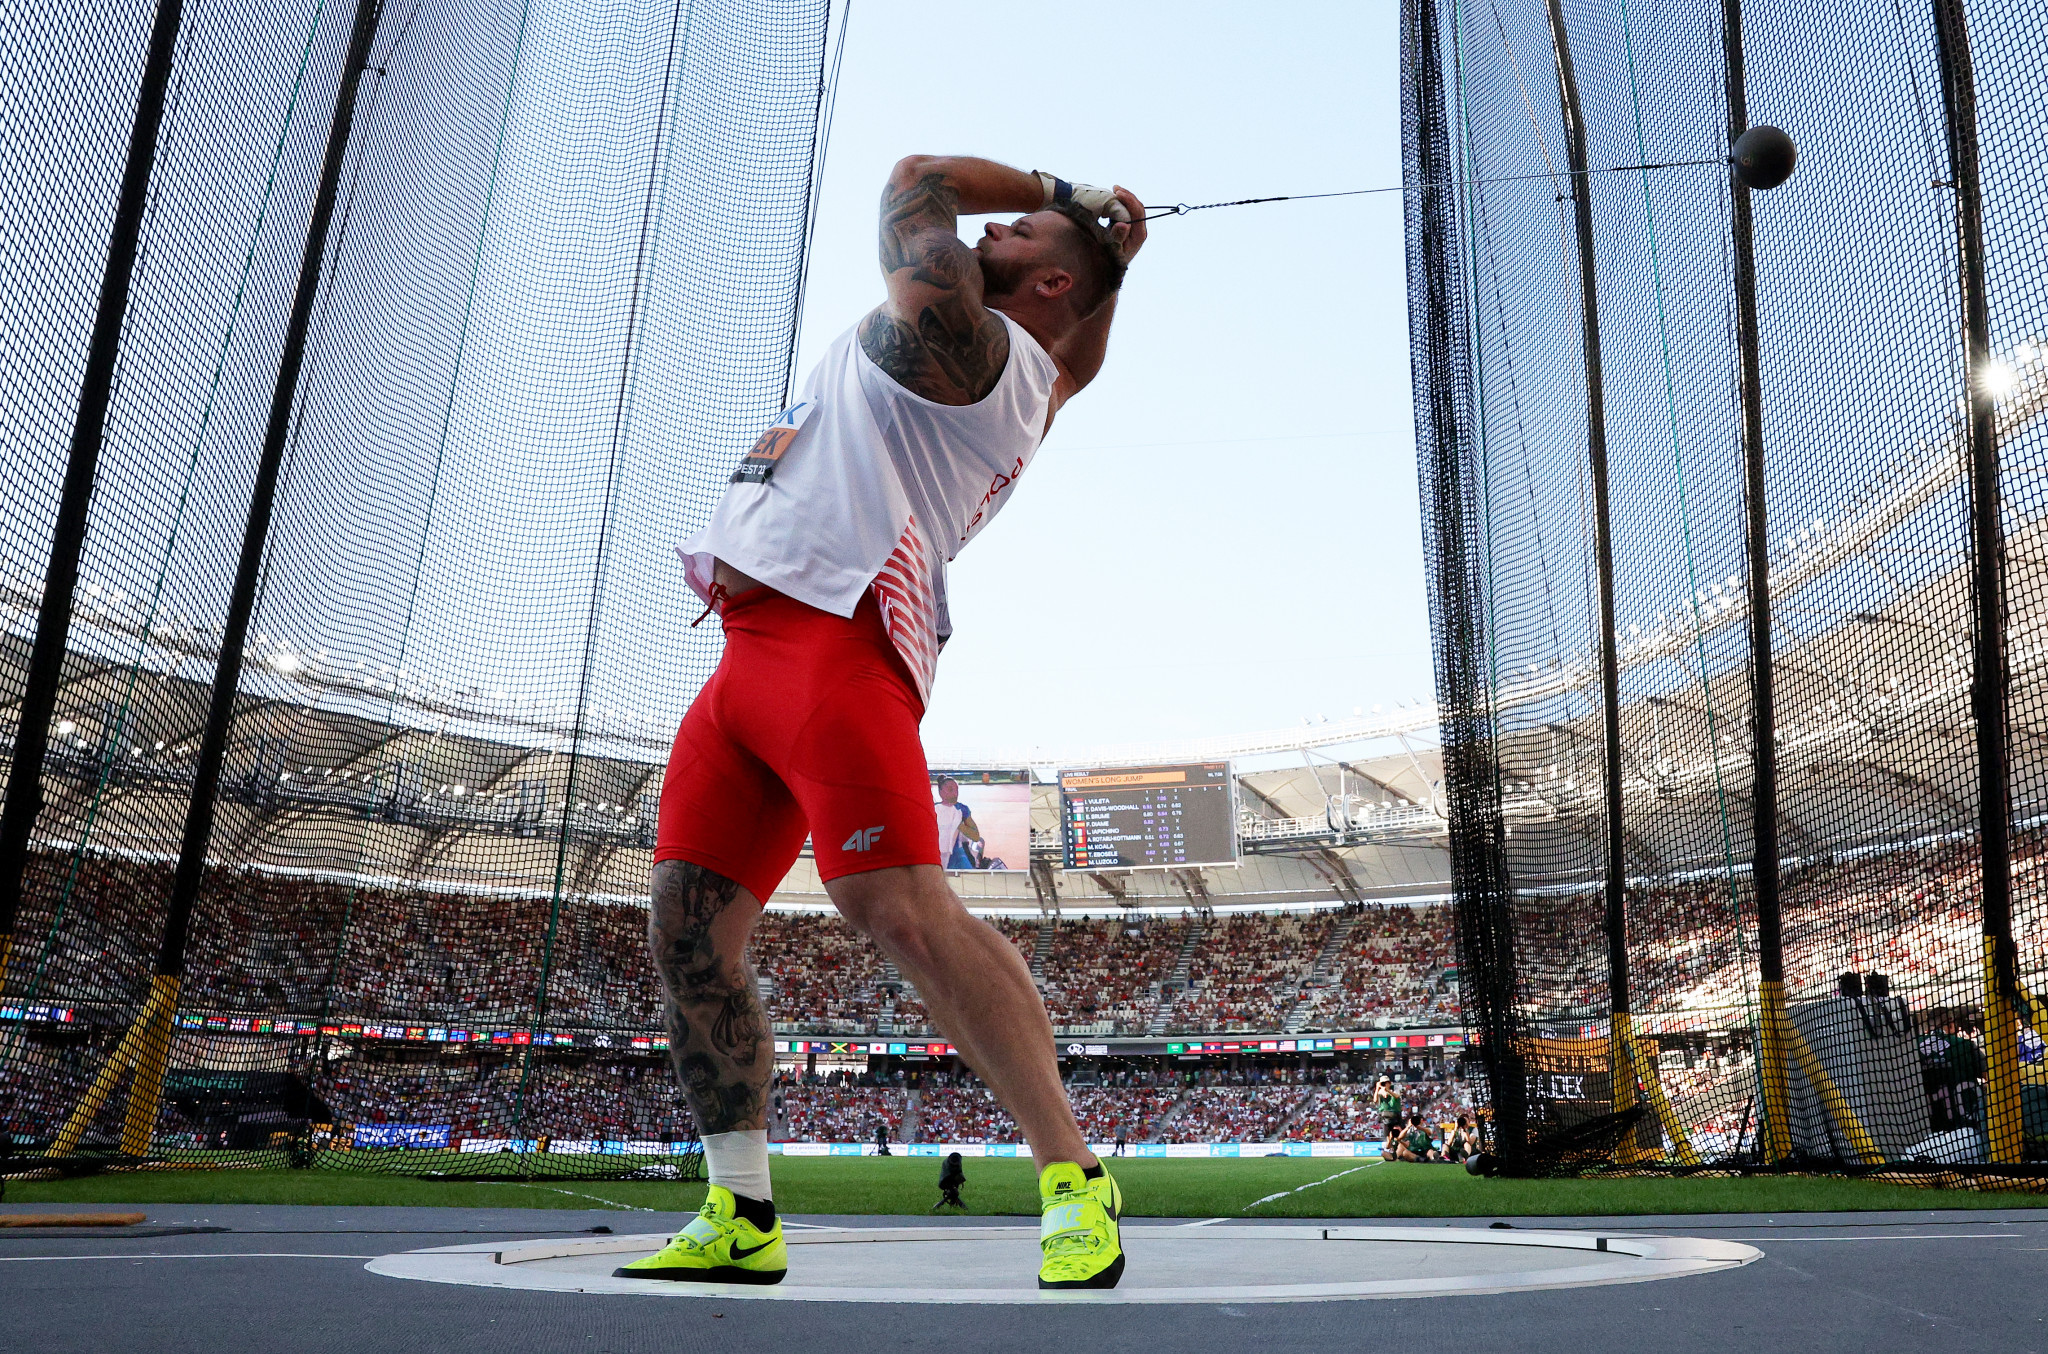 Paweł Fajdek of Poland had won five consecutive hammer throw golds at the World Championships dating back to 2013, but finished fourth in Budapest with 80.00m ©Getty Images